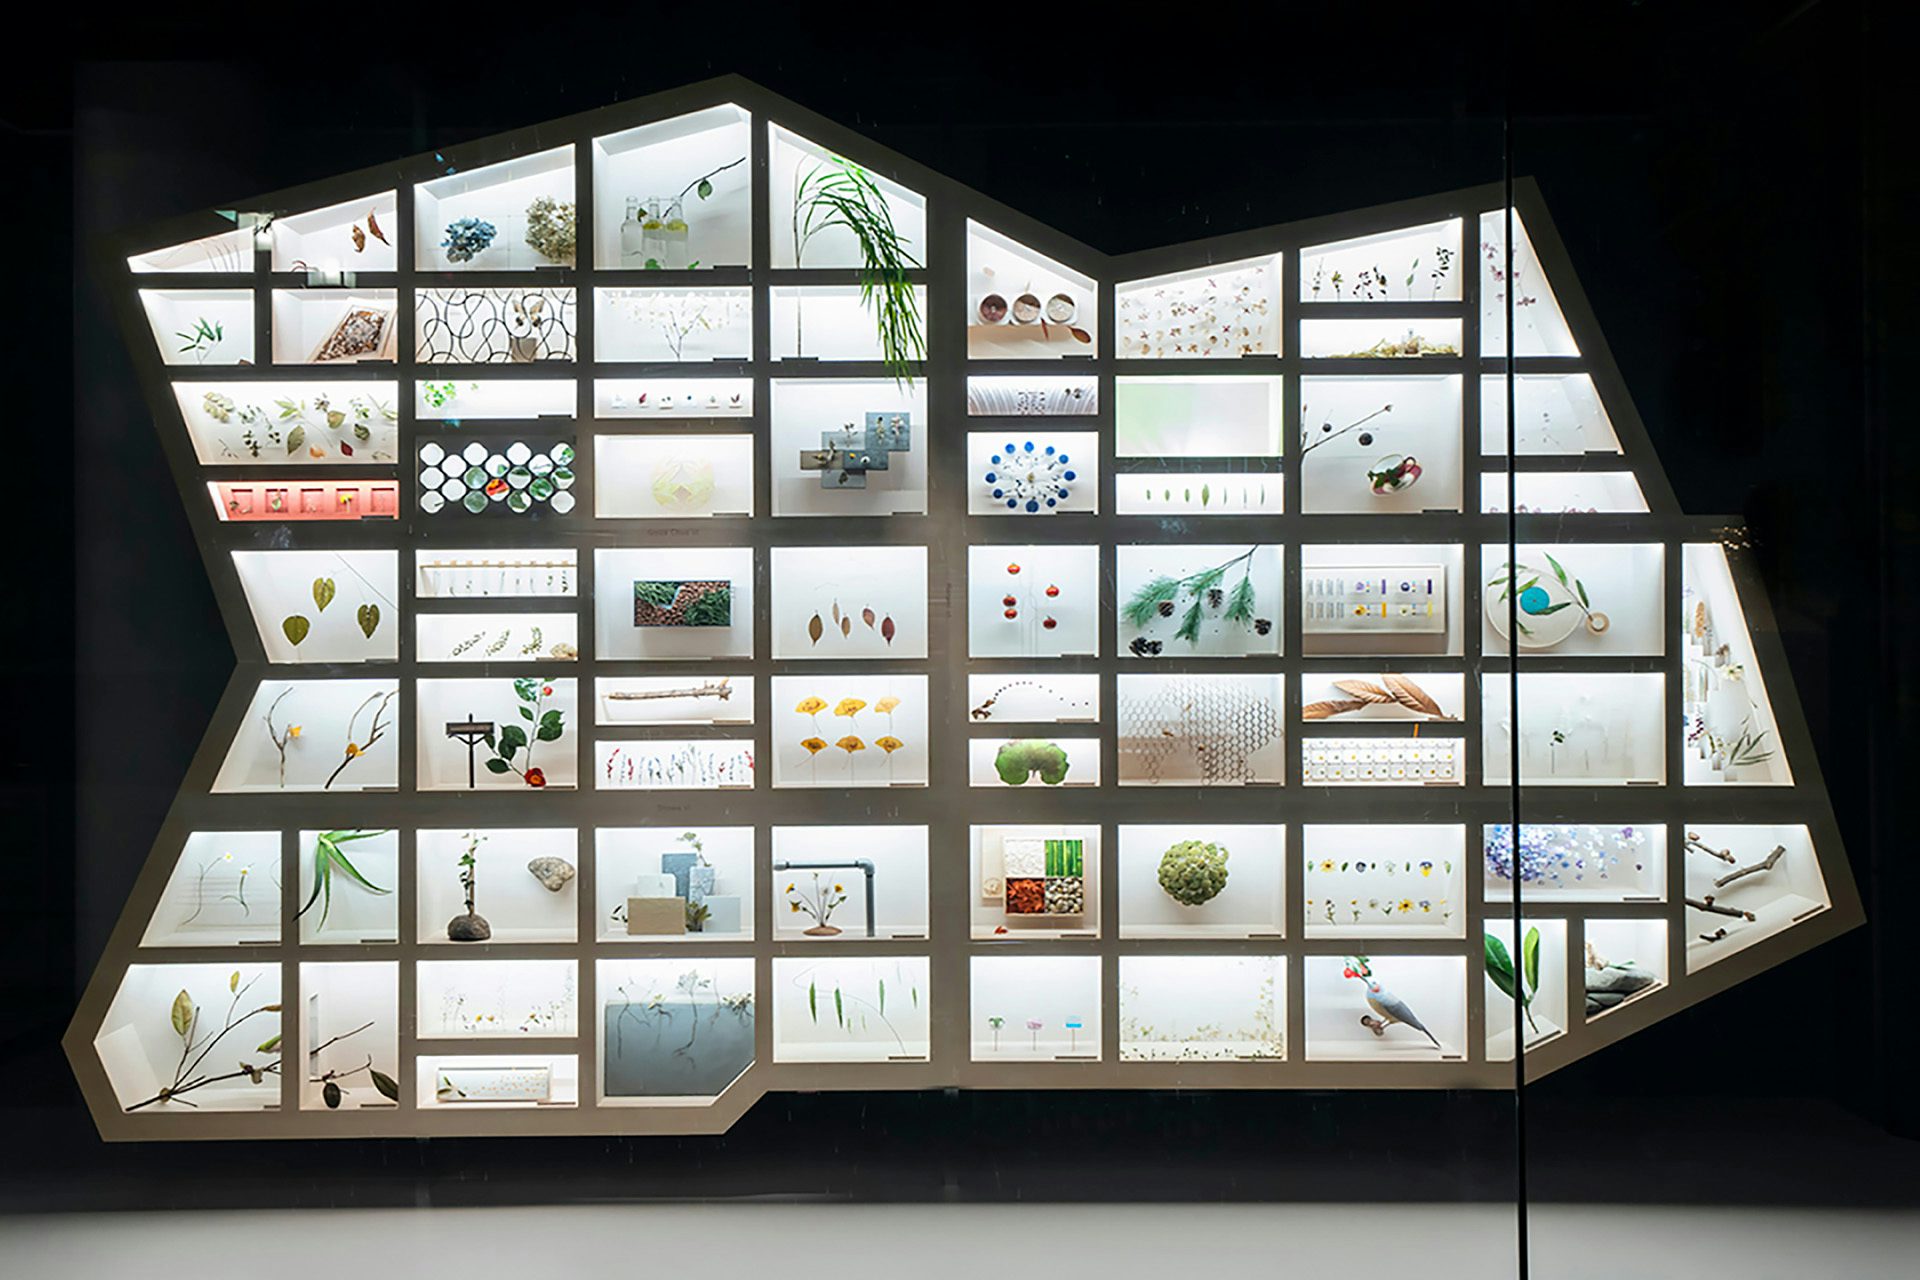 Photo of Shiseido's window display in its Ginza store, which features display boxes stacked on top of each other, with examples of plantlife inside each display